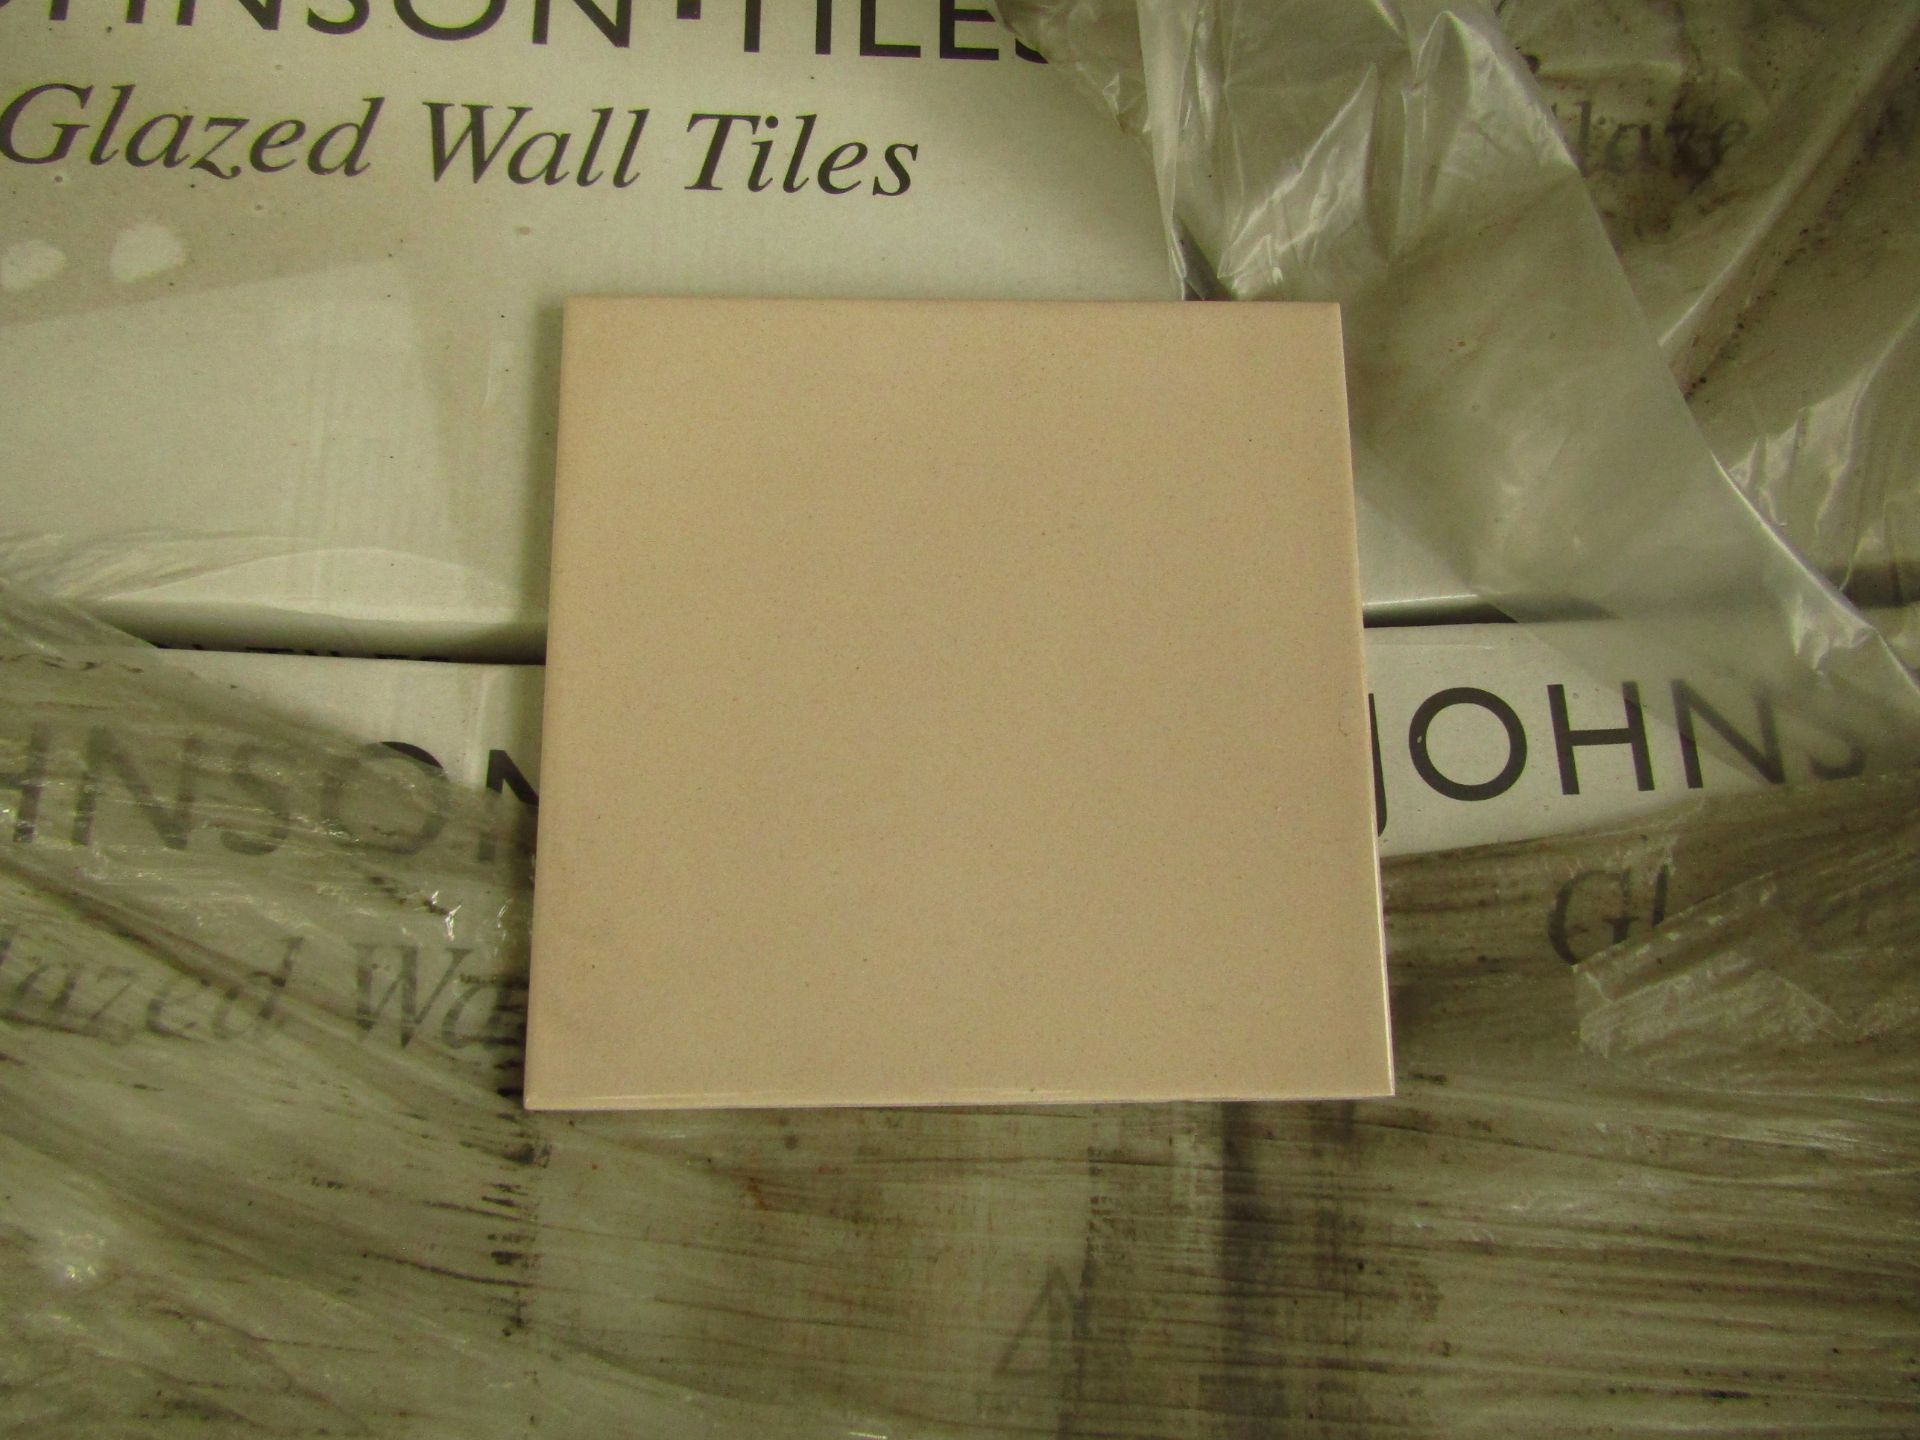 90x packs of 44 Barley 150 x 150 Glazed wall tiles (1515SPL04044), new, RRP £14.99 a pack giving a